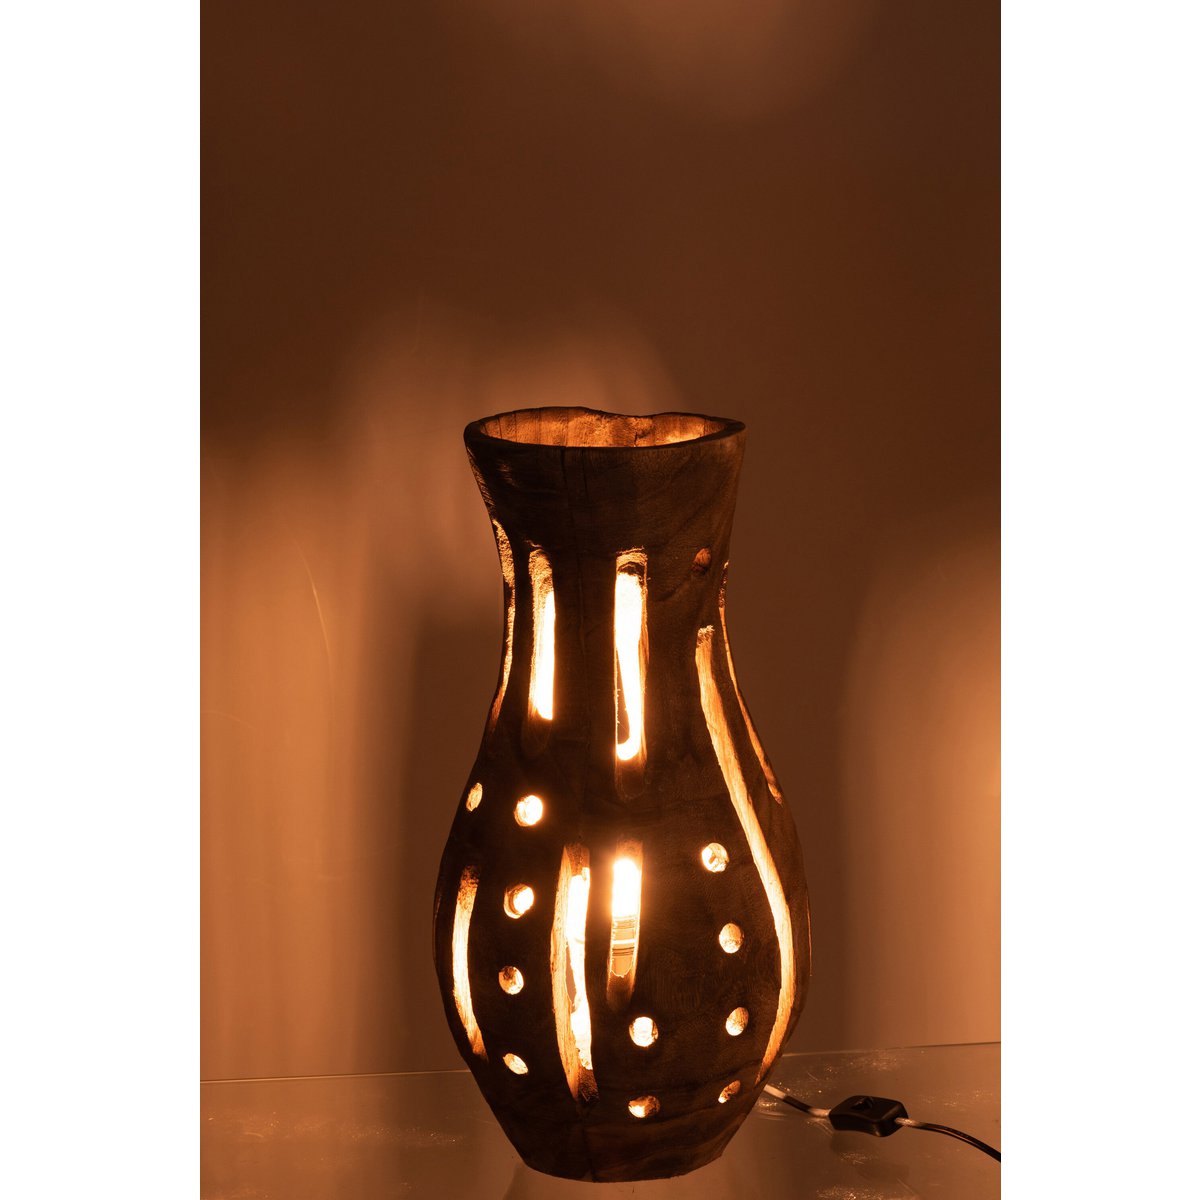 Wooden table lamp - Gypsy 1